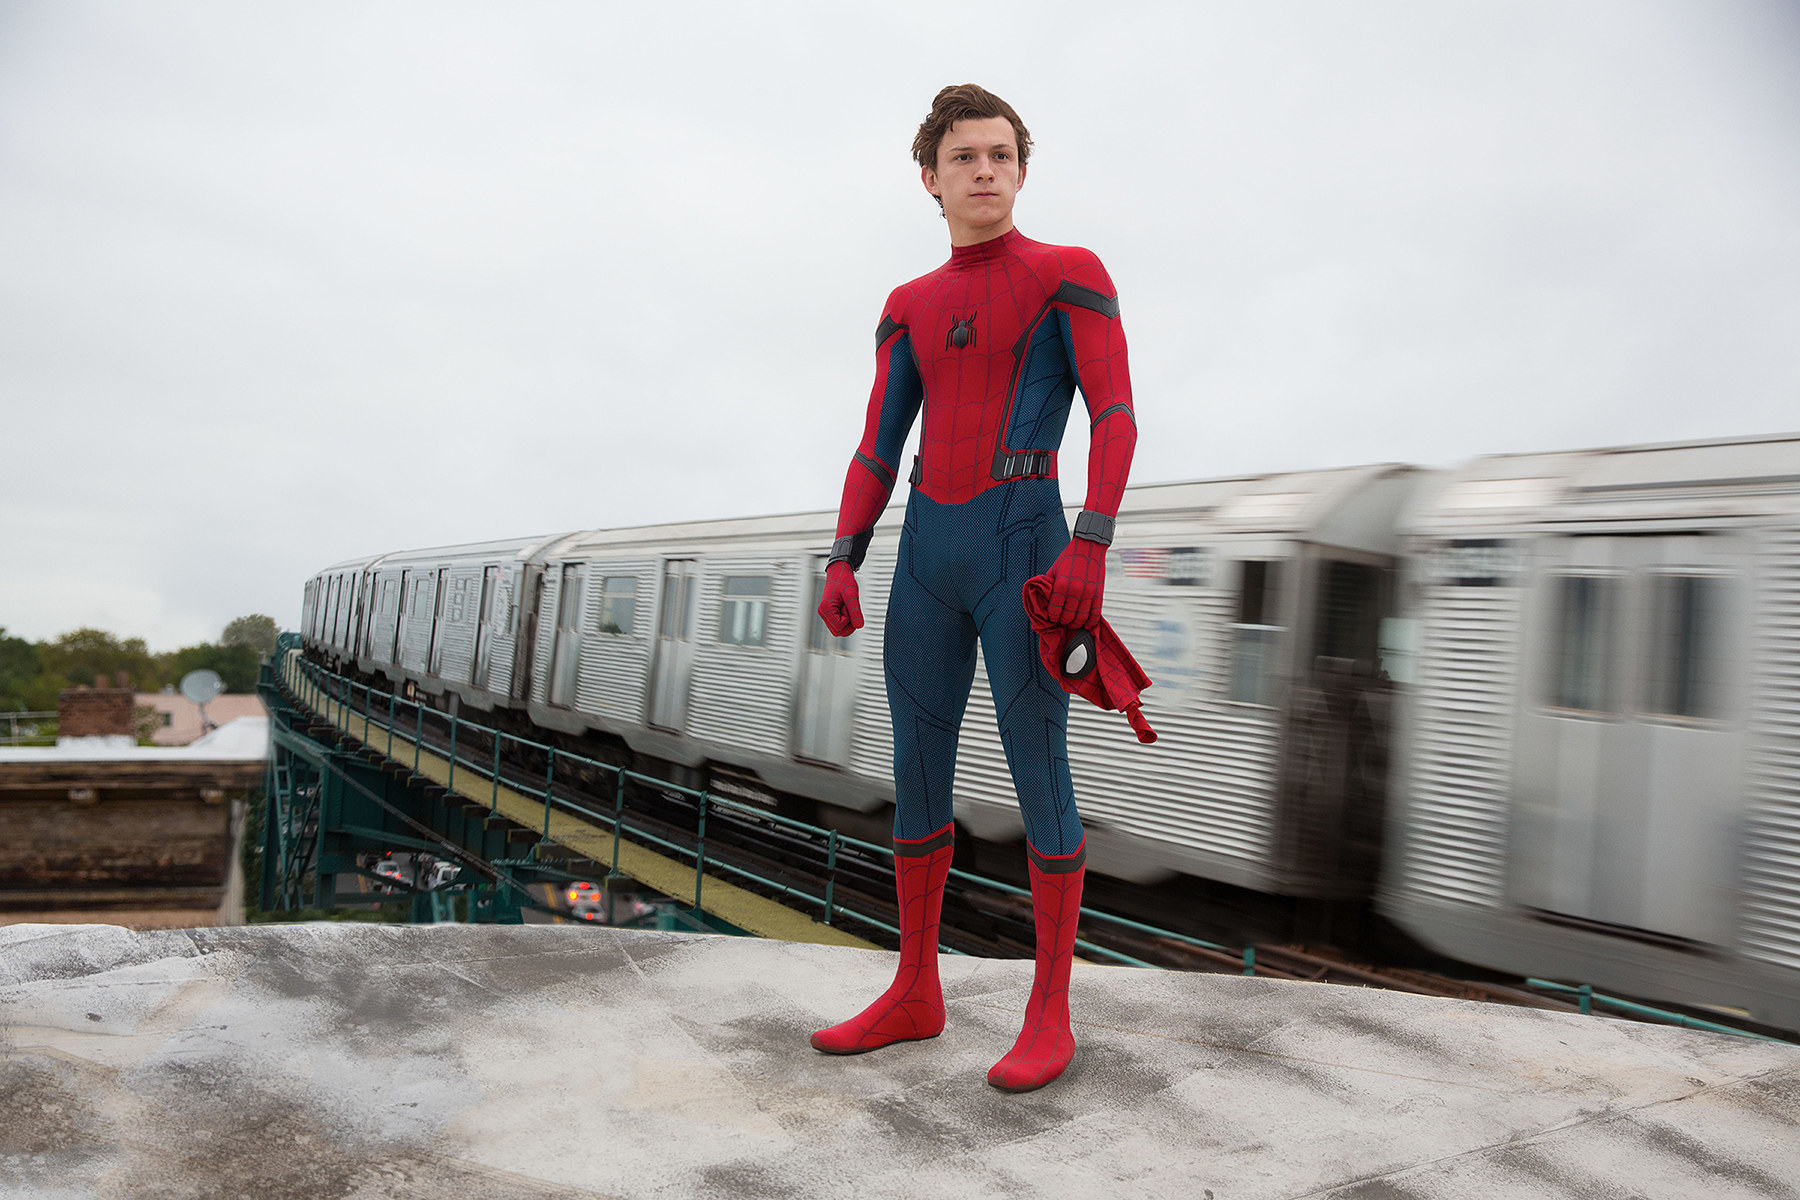 Tom as Spider-Man standing as a subway train goes by